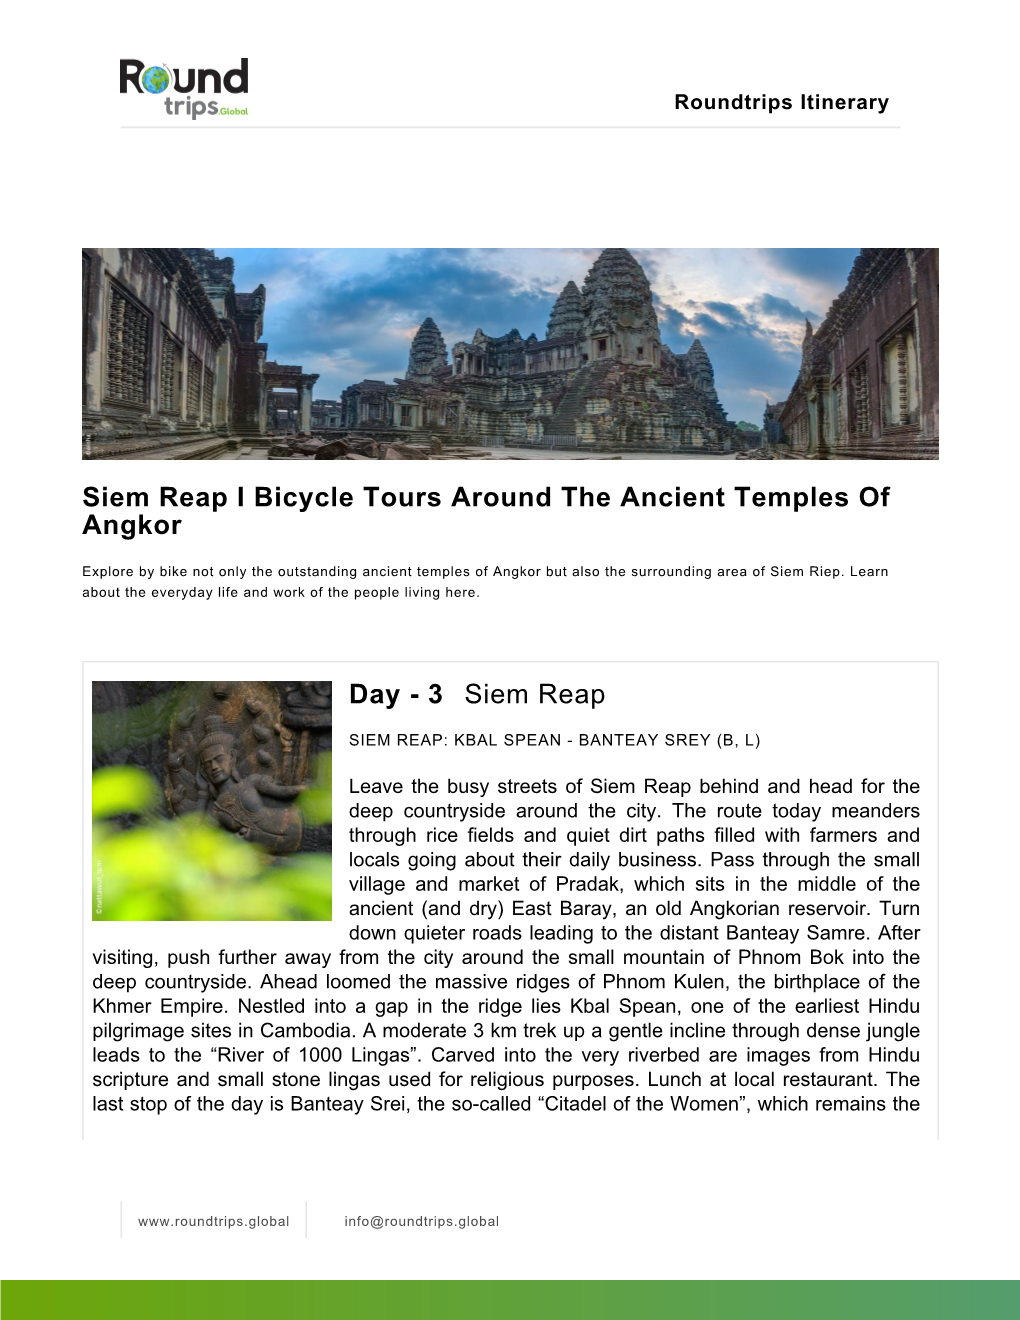 Siem Reap I Bicycle Tours Around the Ancient Temples of Angkor